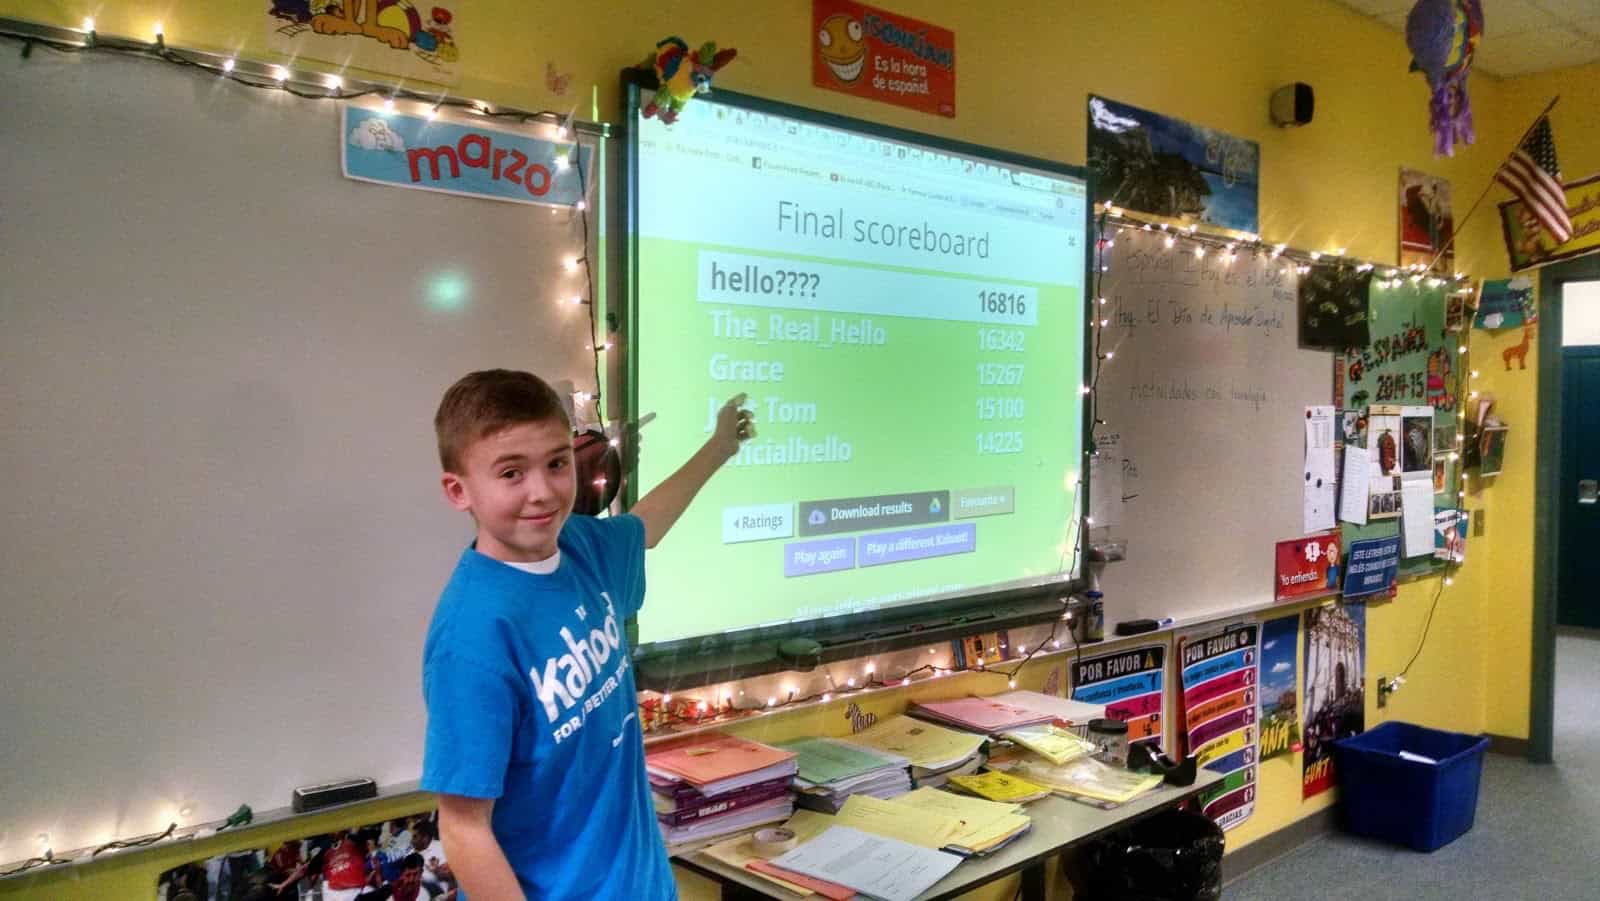 Games for kids with Kahoot! Kids